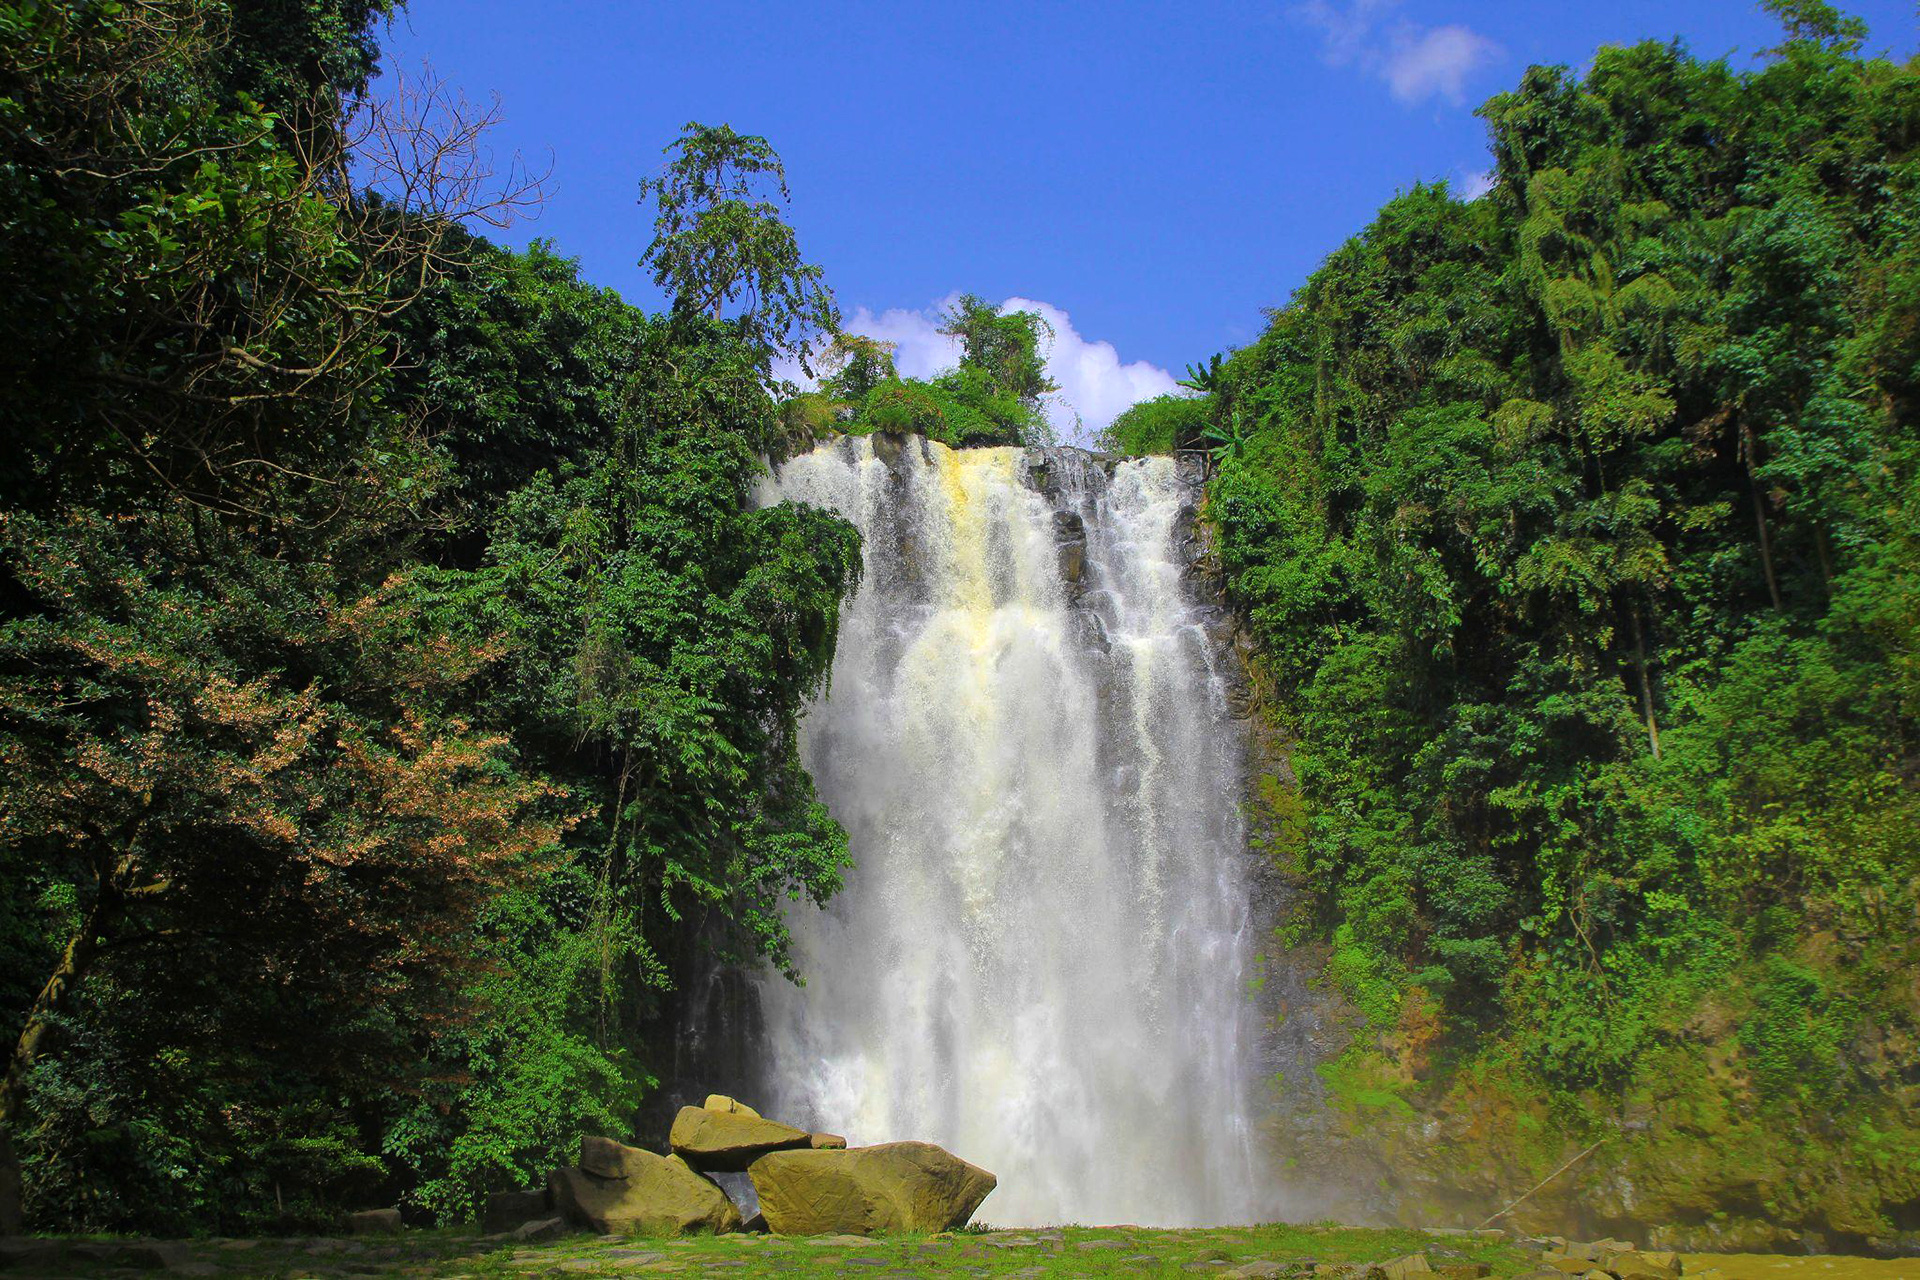 Bobla Waterfall is an impressive destination located along the way to Da Lat City, Lam Dong Province. Photo: M.V. / Tuoi Tre